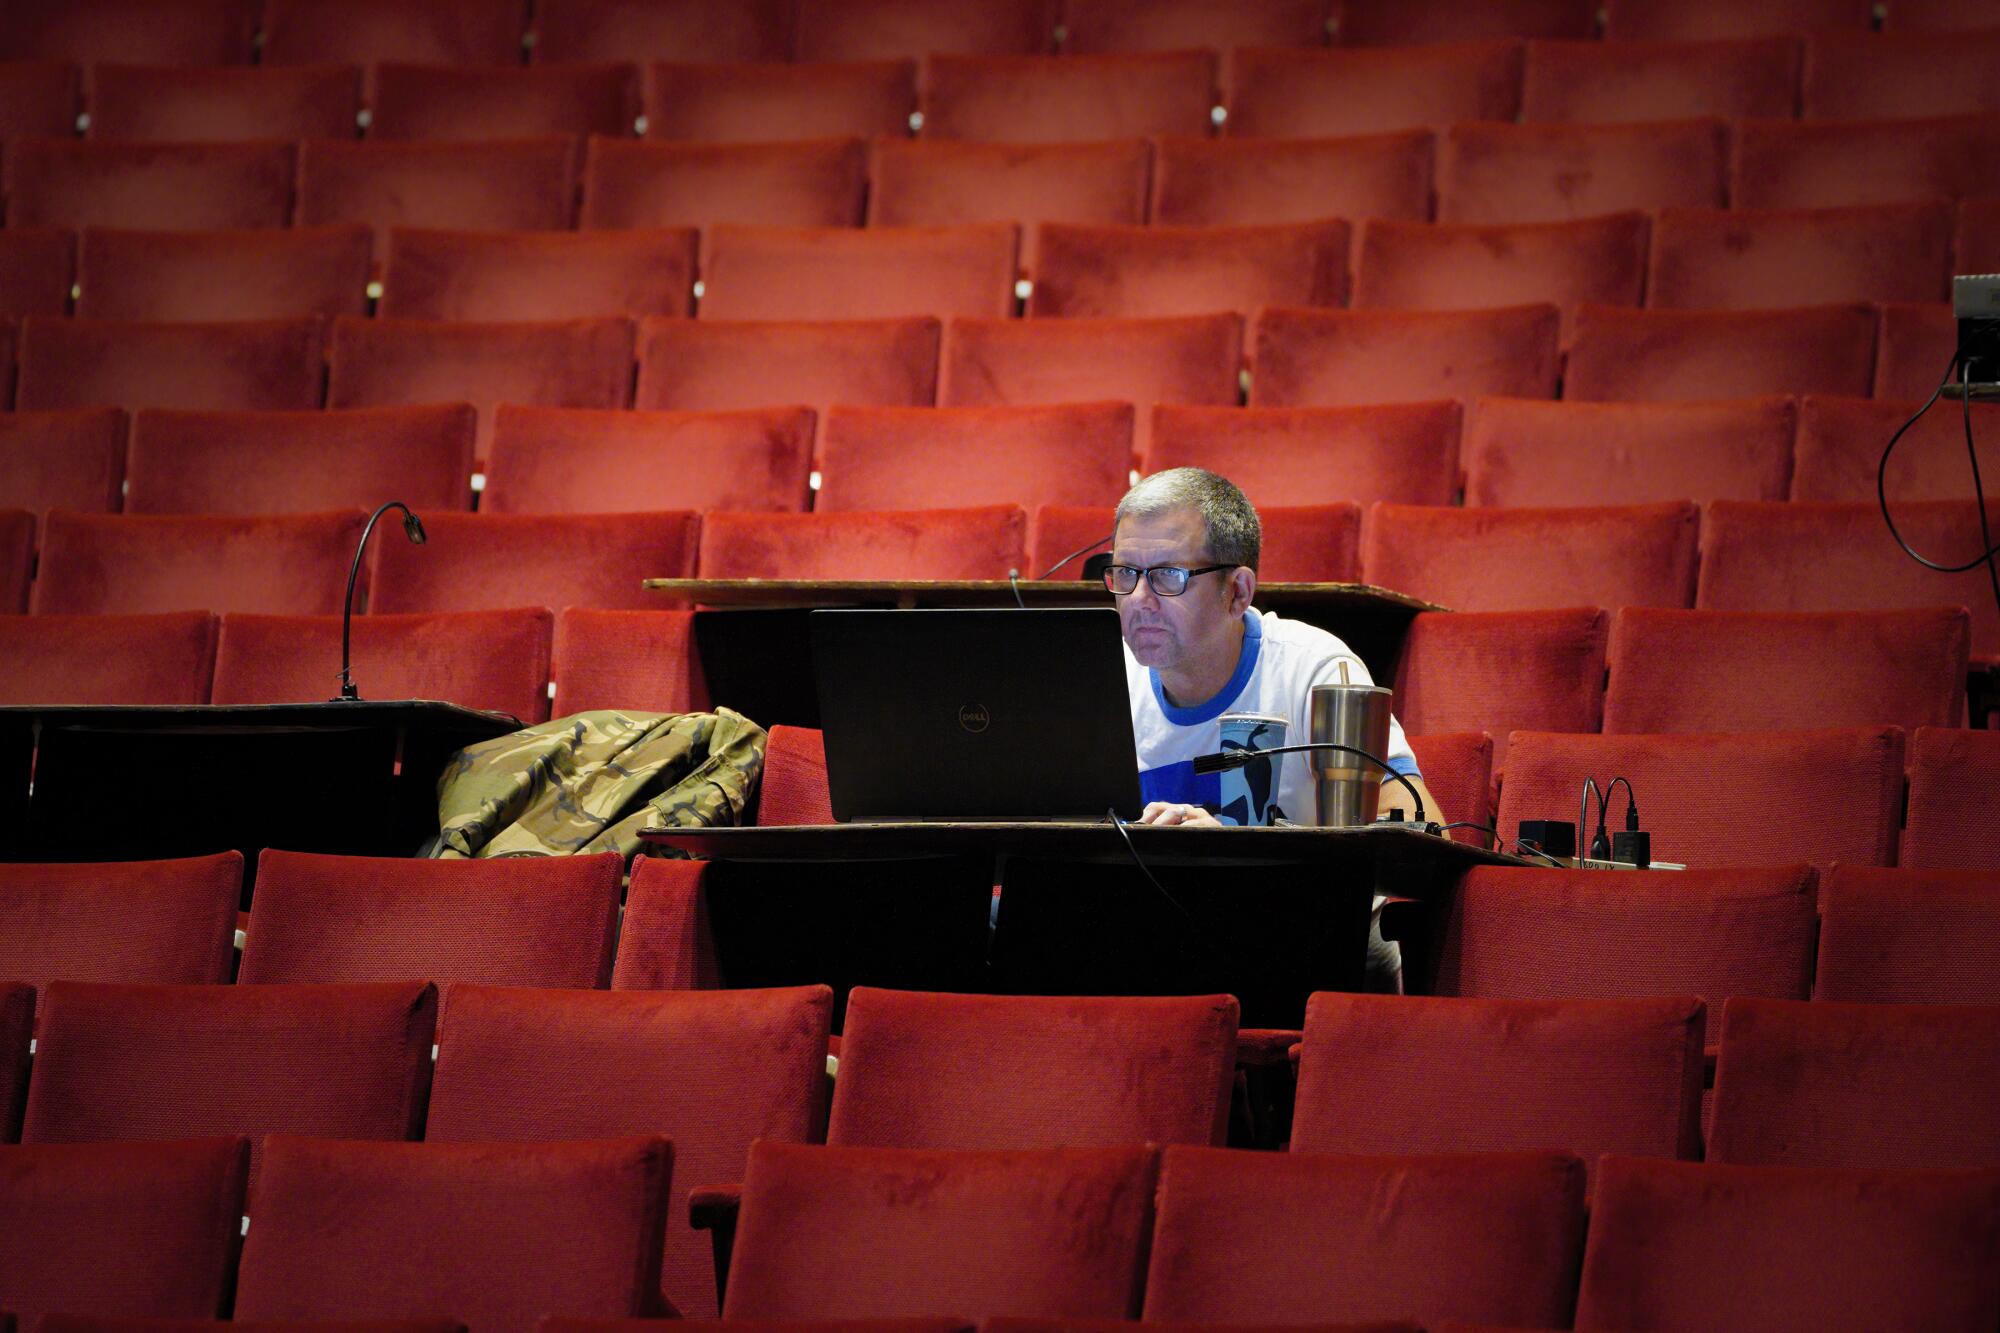 Technical Director, Tim Wallace works from his temporary desk set in the audience.